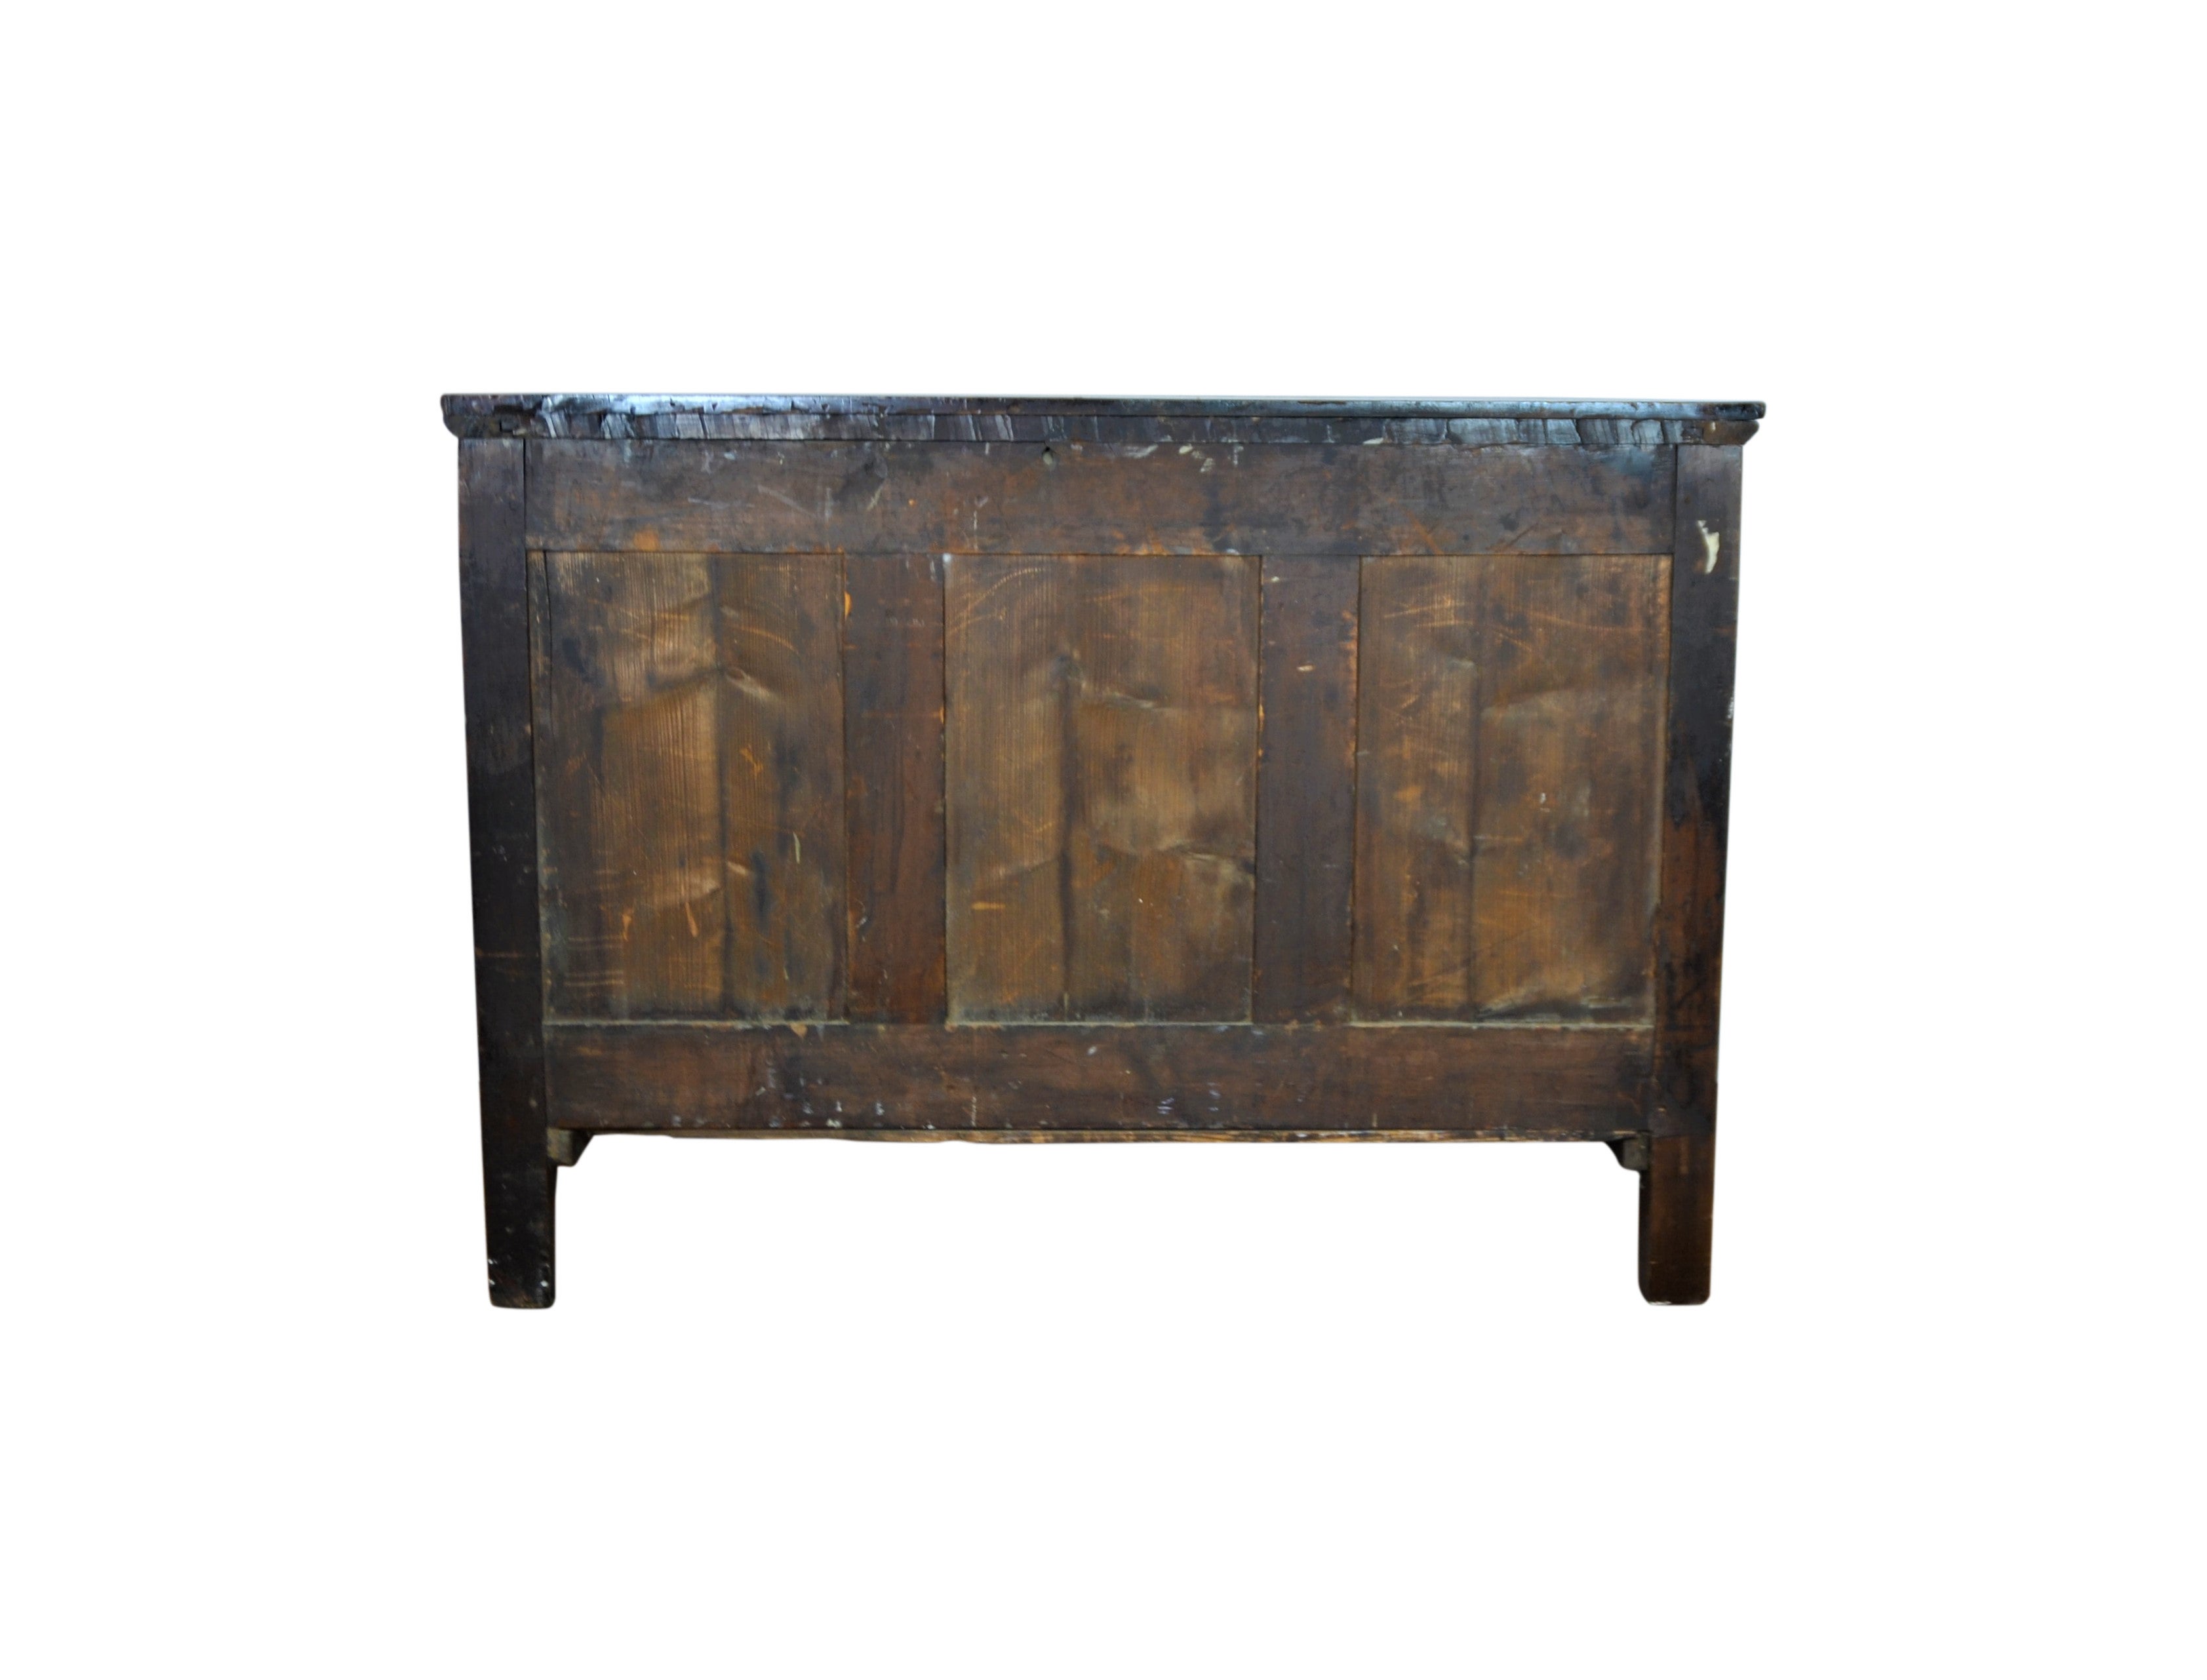 C.1820 French Empire Commode. Fruitwood drawer fronts and a wide grain mahogany top.Bronze column tops and bases original hardware.